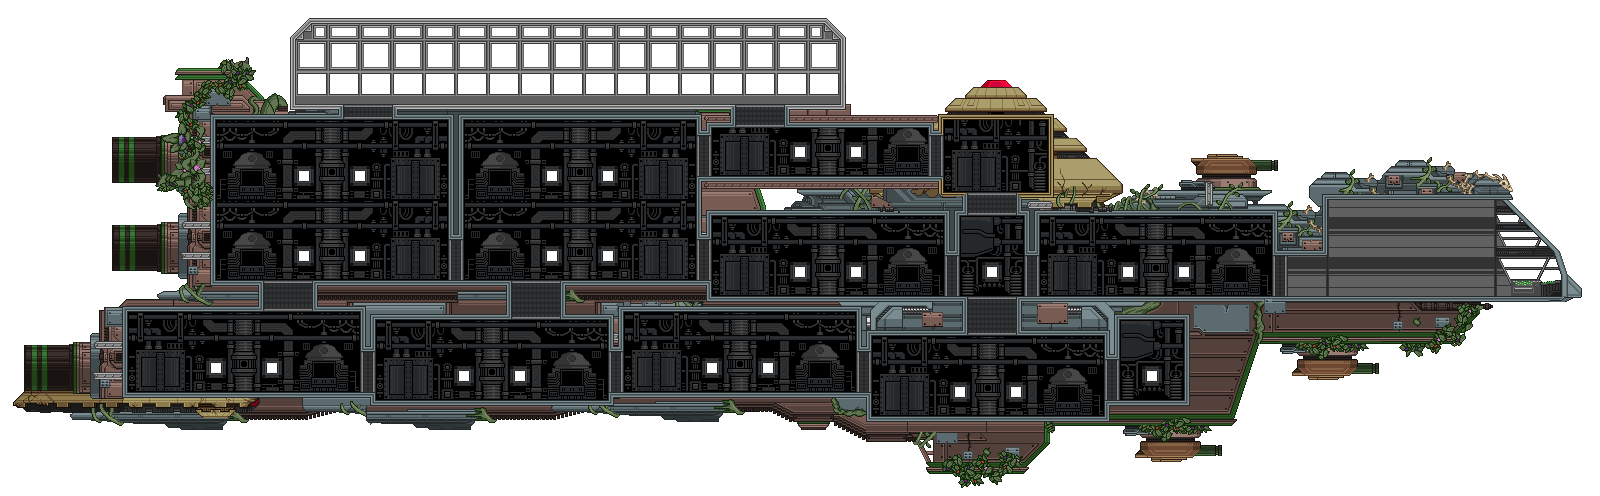 buying the ship upgrade starbound